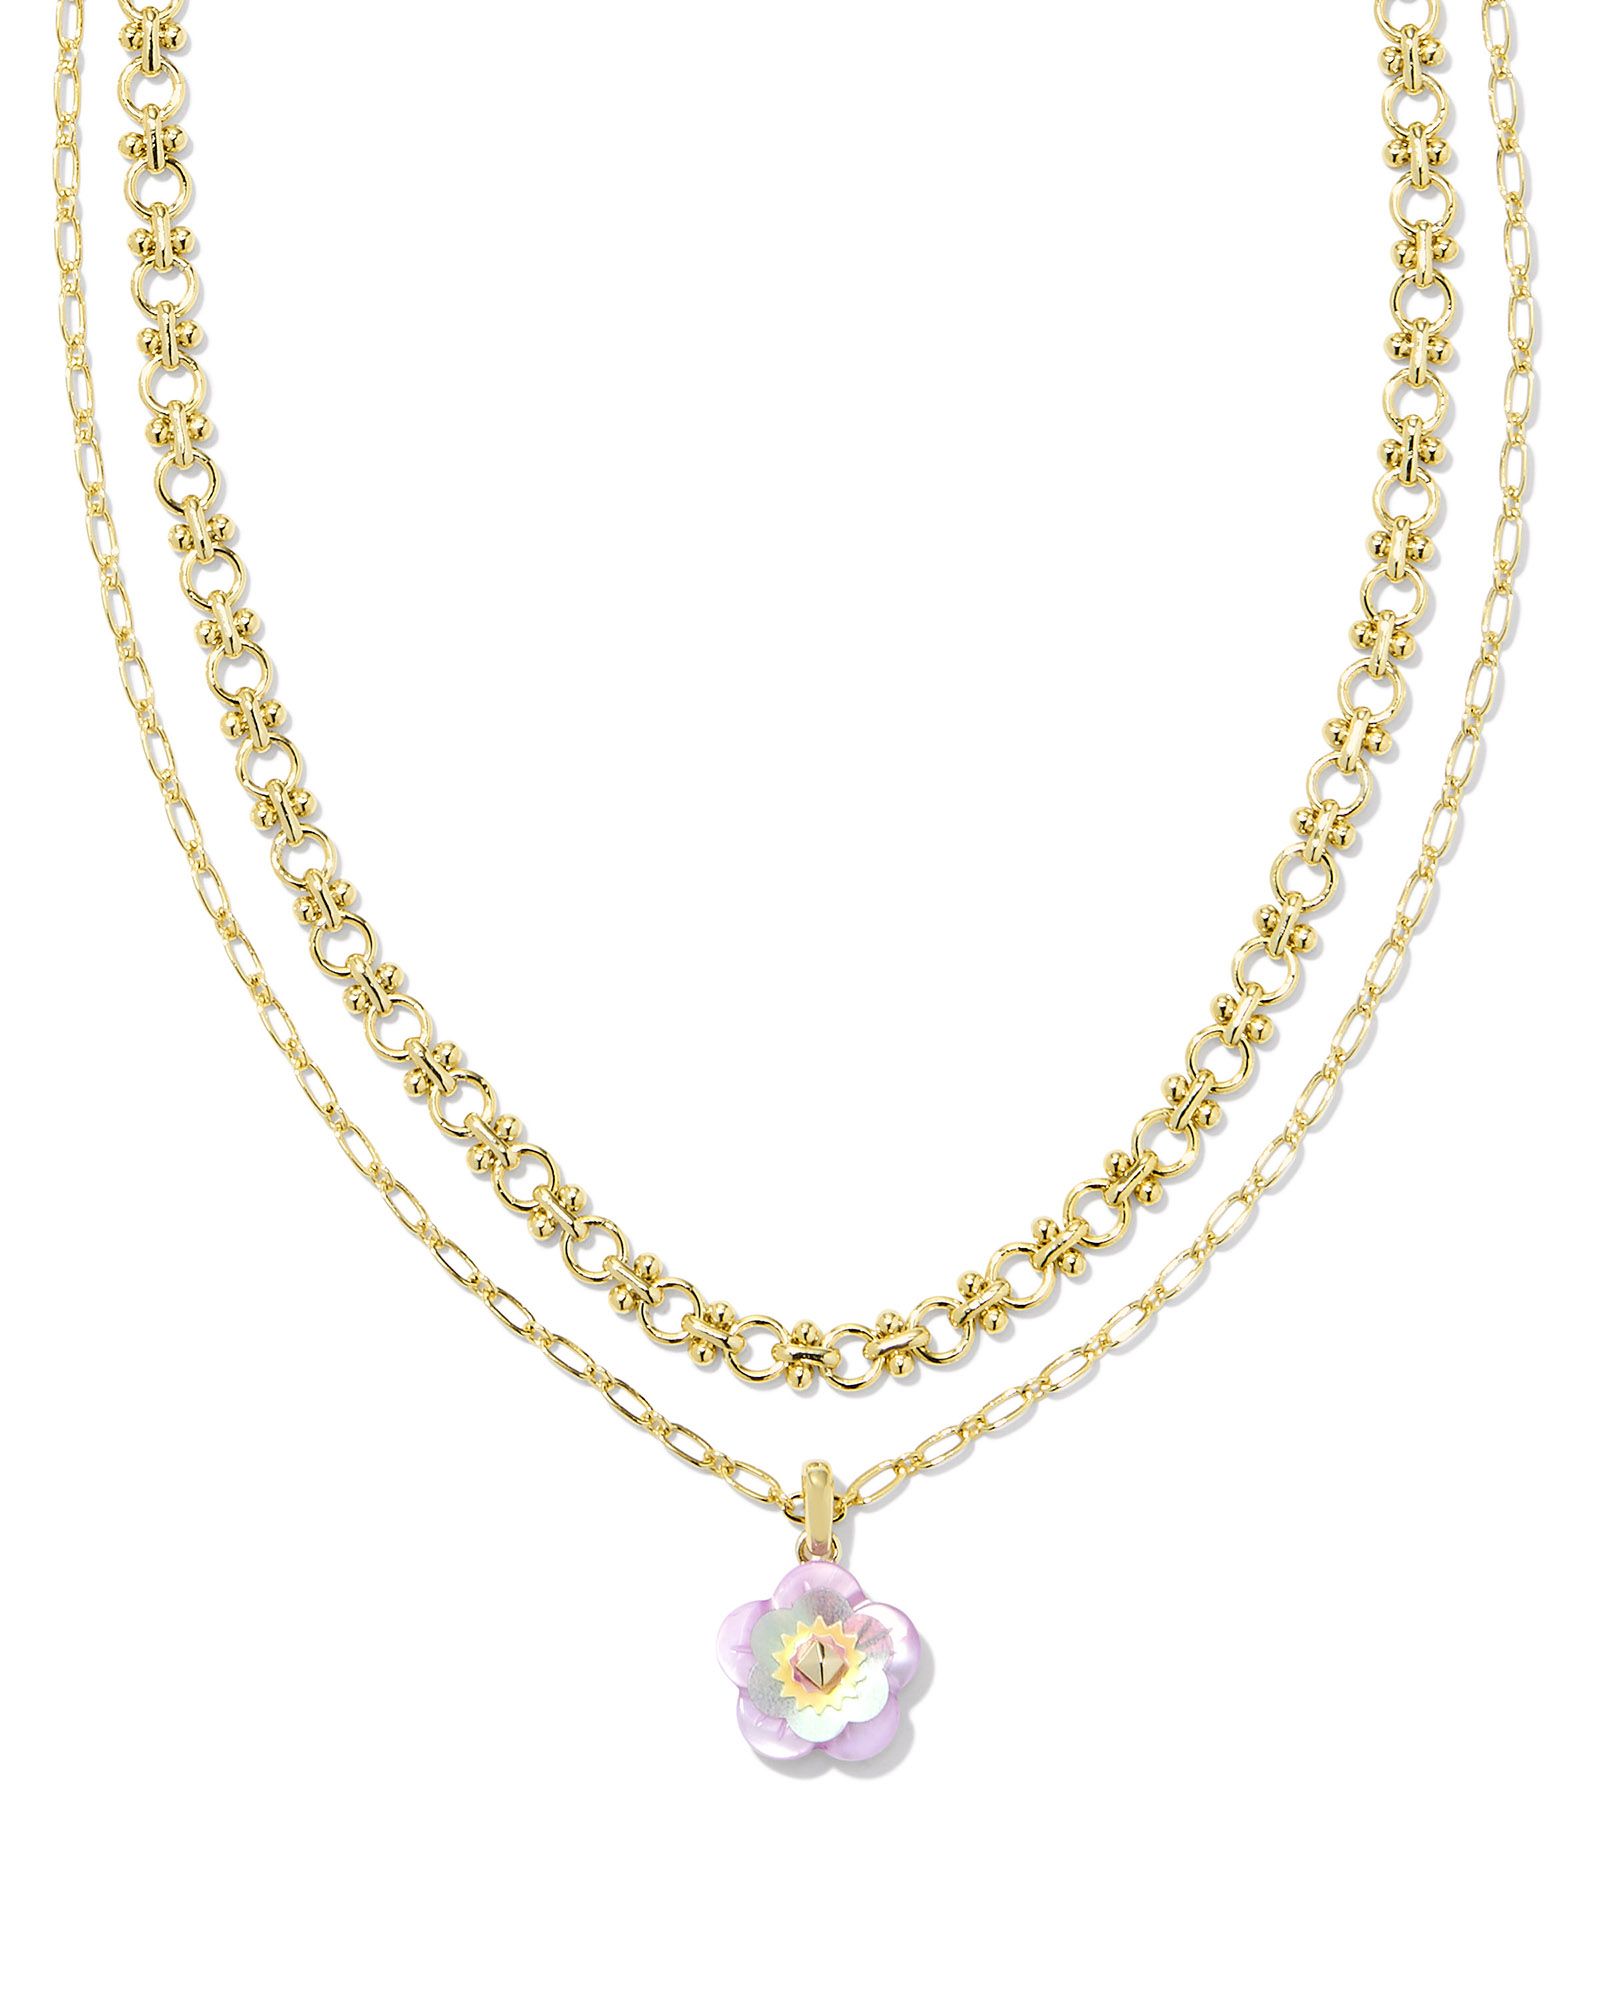 Deliah Gold Multi Strand Necklace in Iridescent Pink White Mix | Kendra Scott